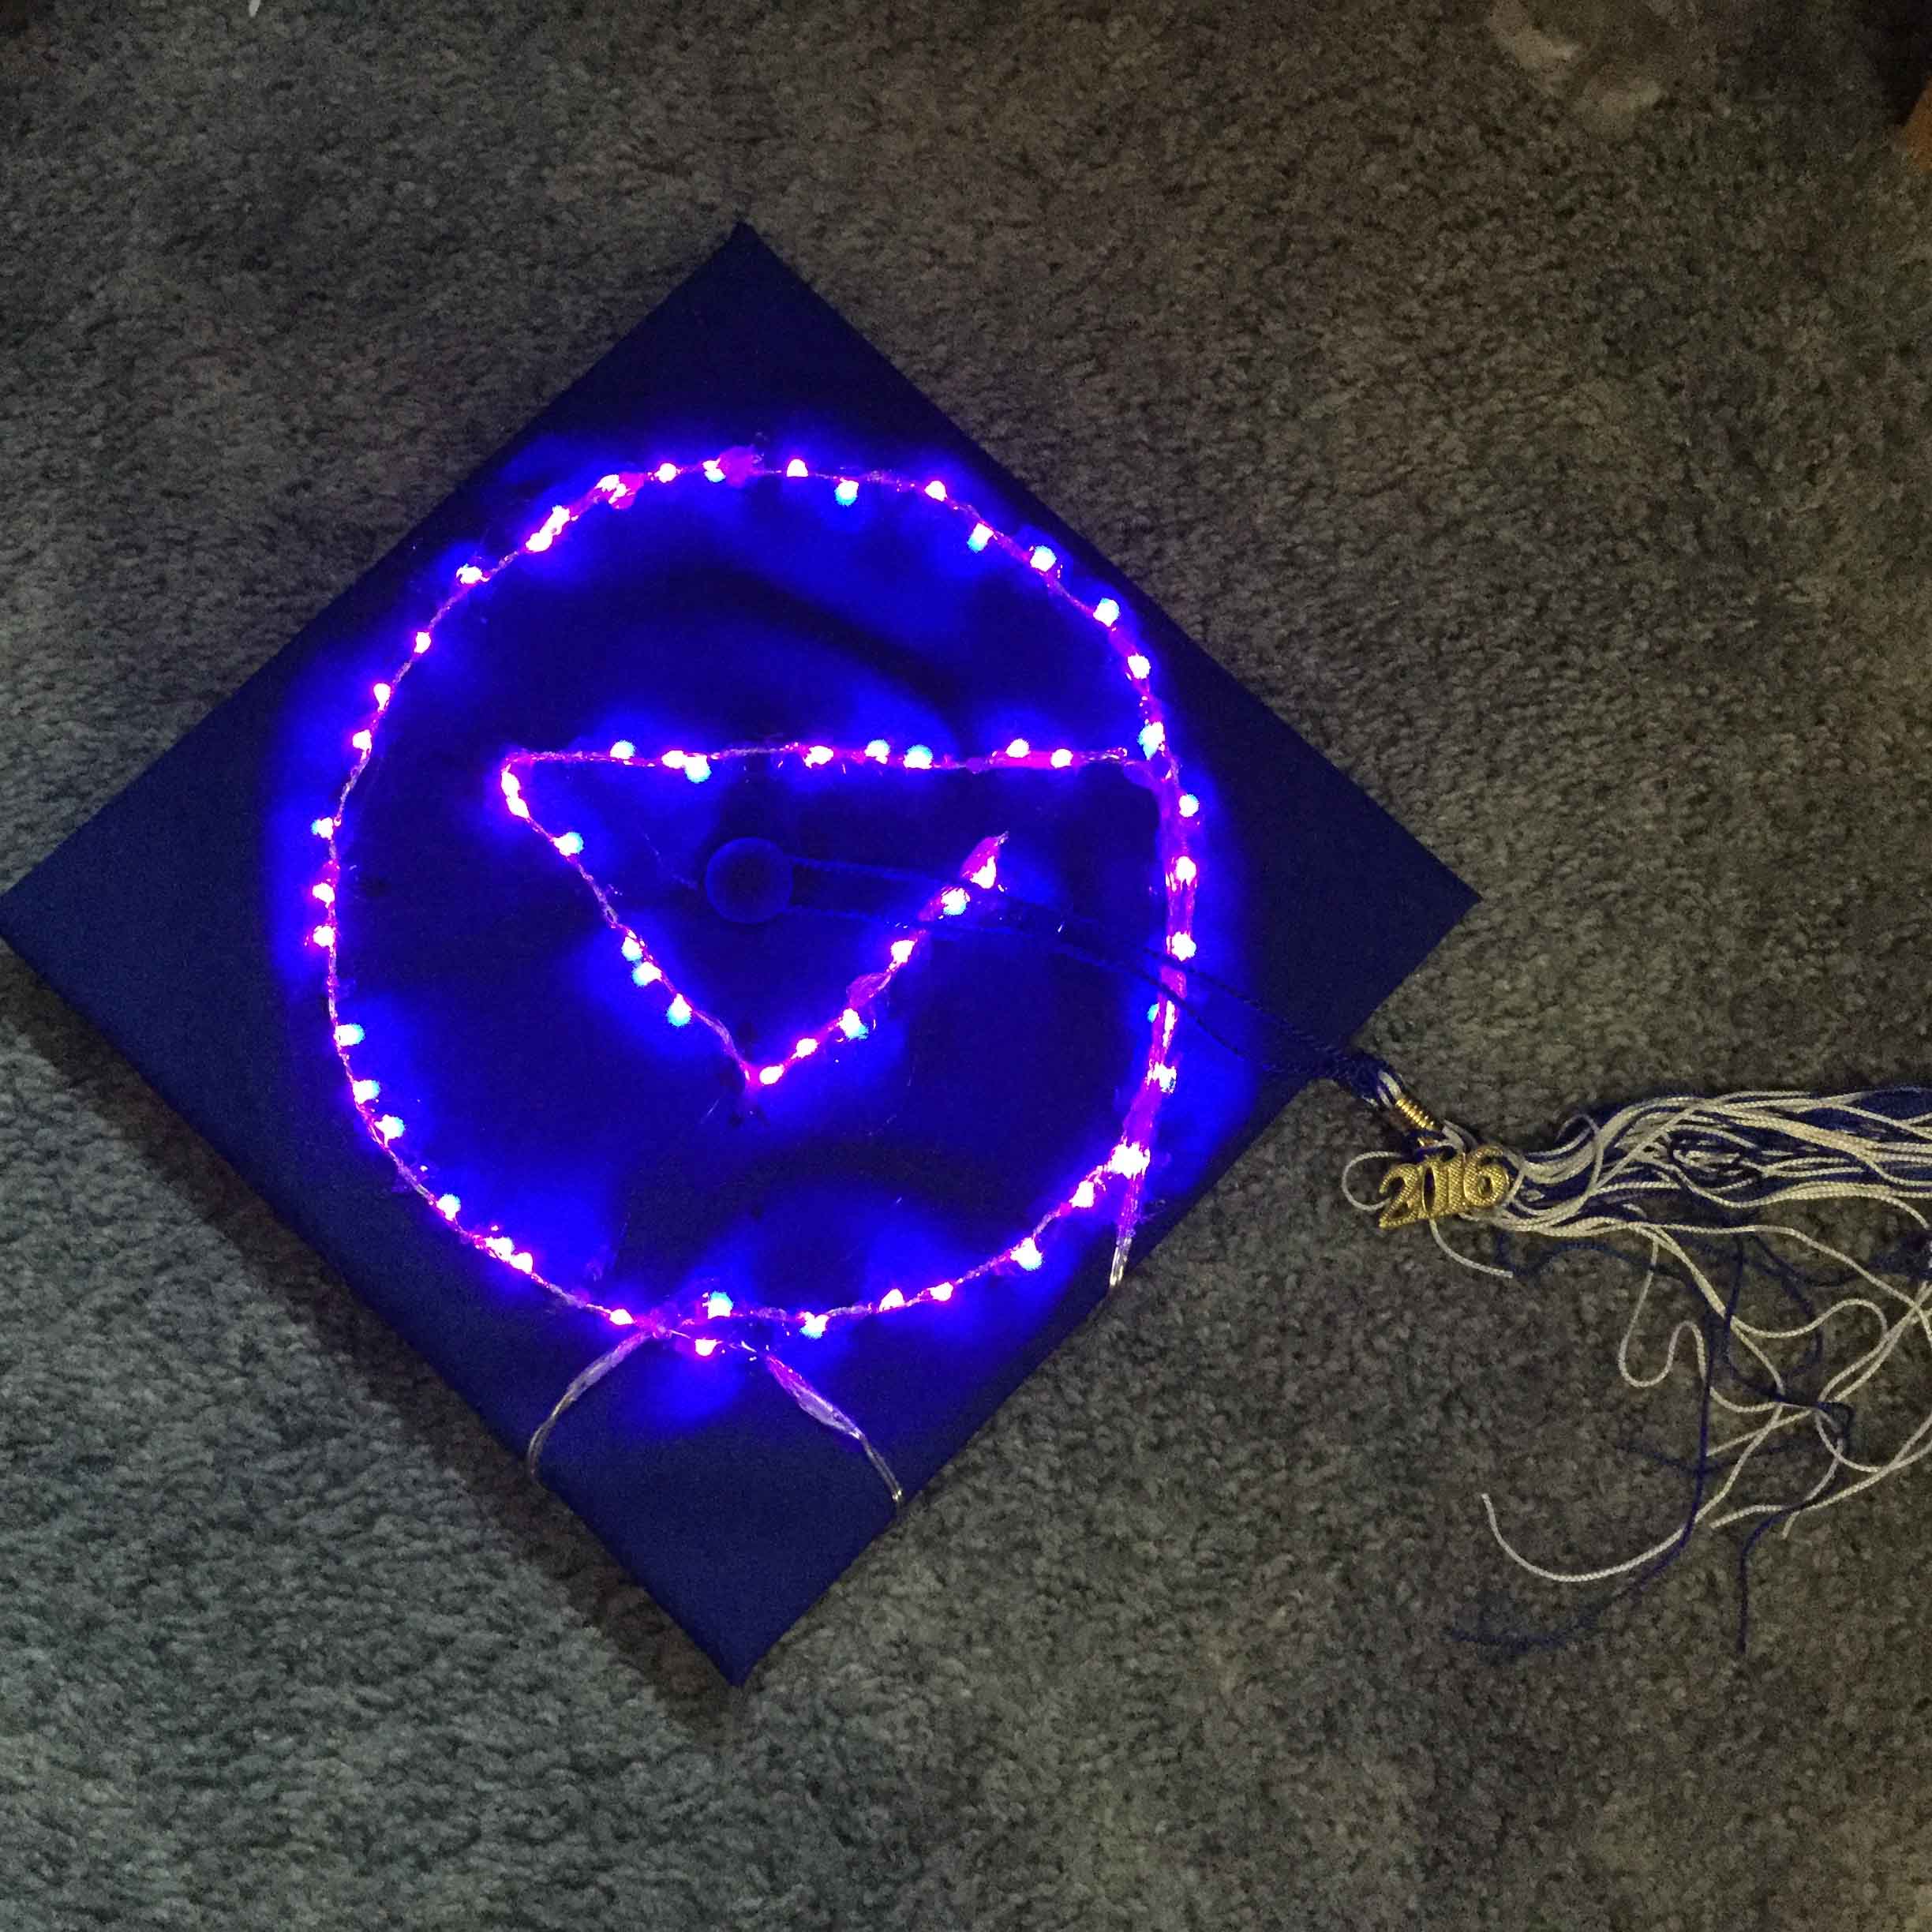 my graduation cap lined with LED strings